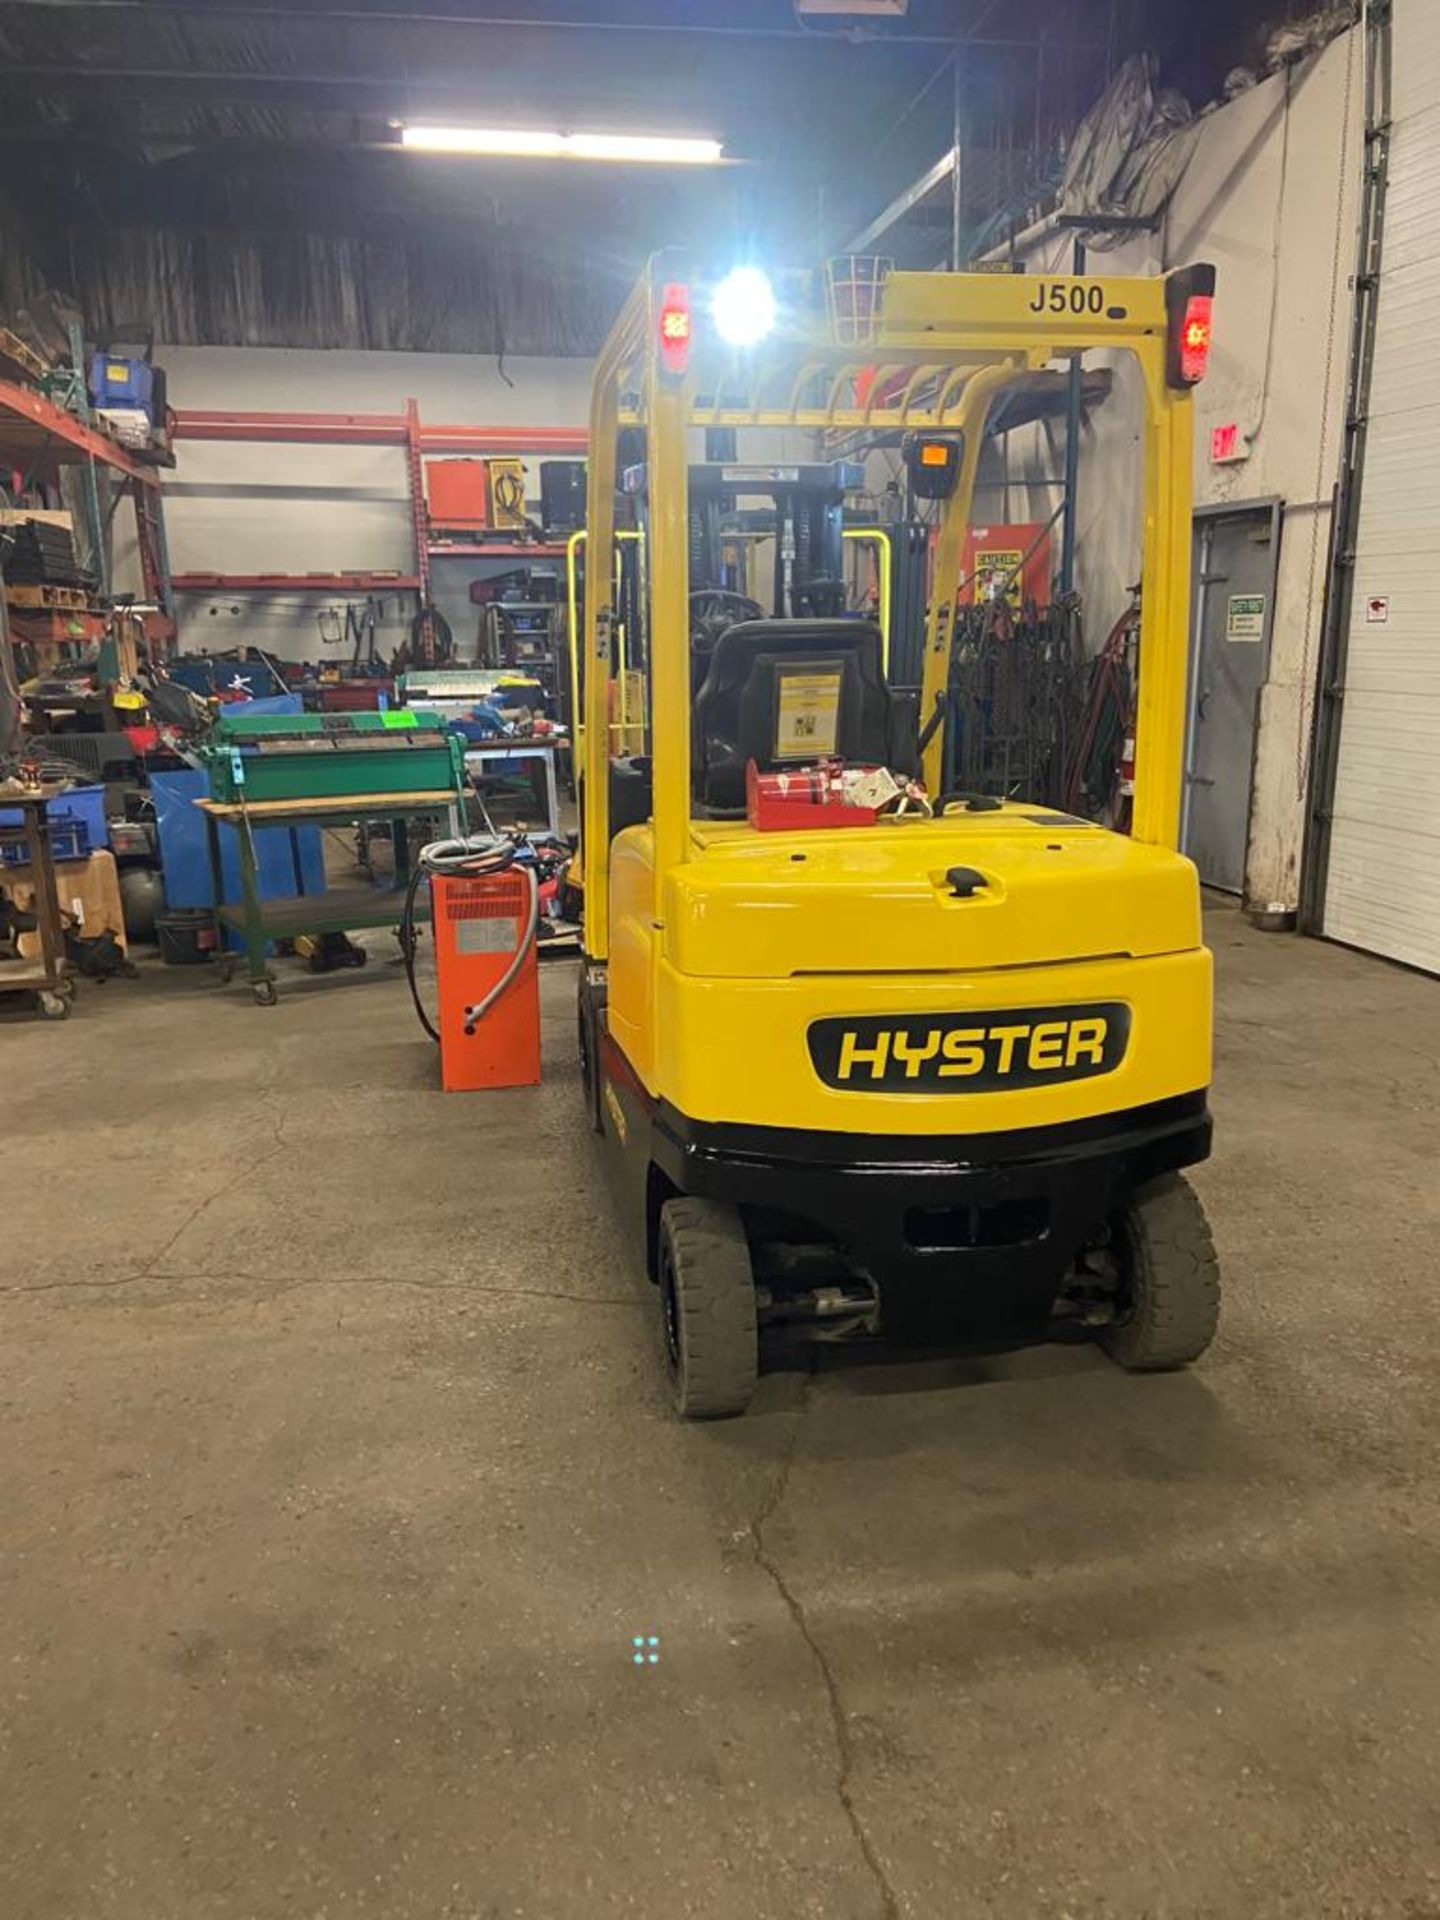 FREE CUSTOMS - MINT 2012 Hyster OUTDOOR ELECTRIC 80V Forklift 5,000lbs Capacity VERY LOW HOURS - Image 6 of 7